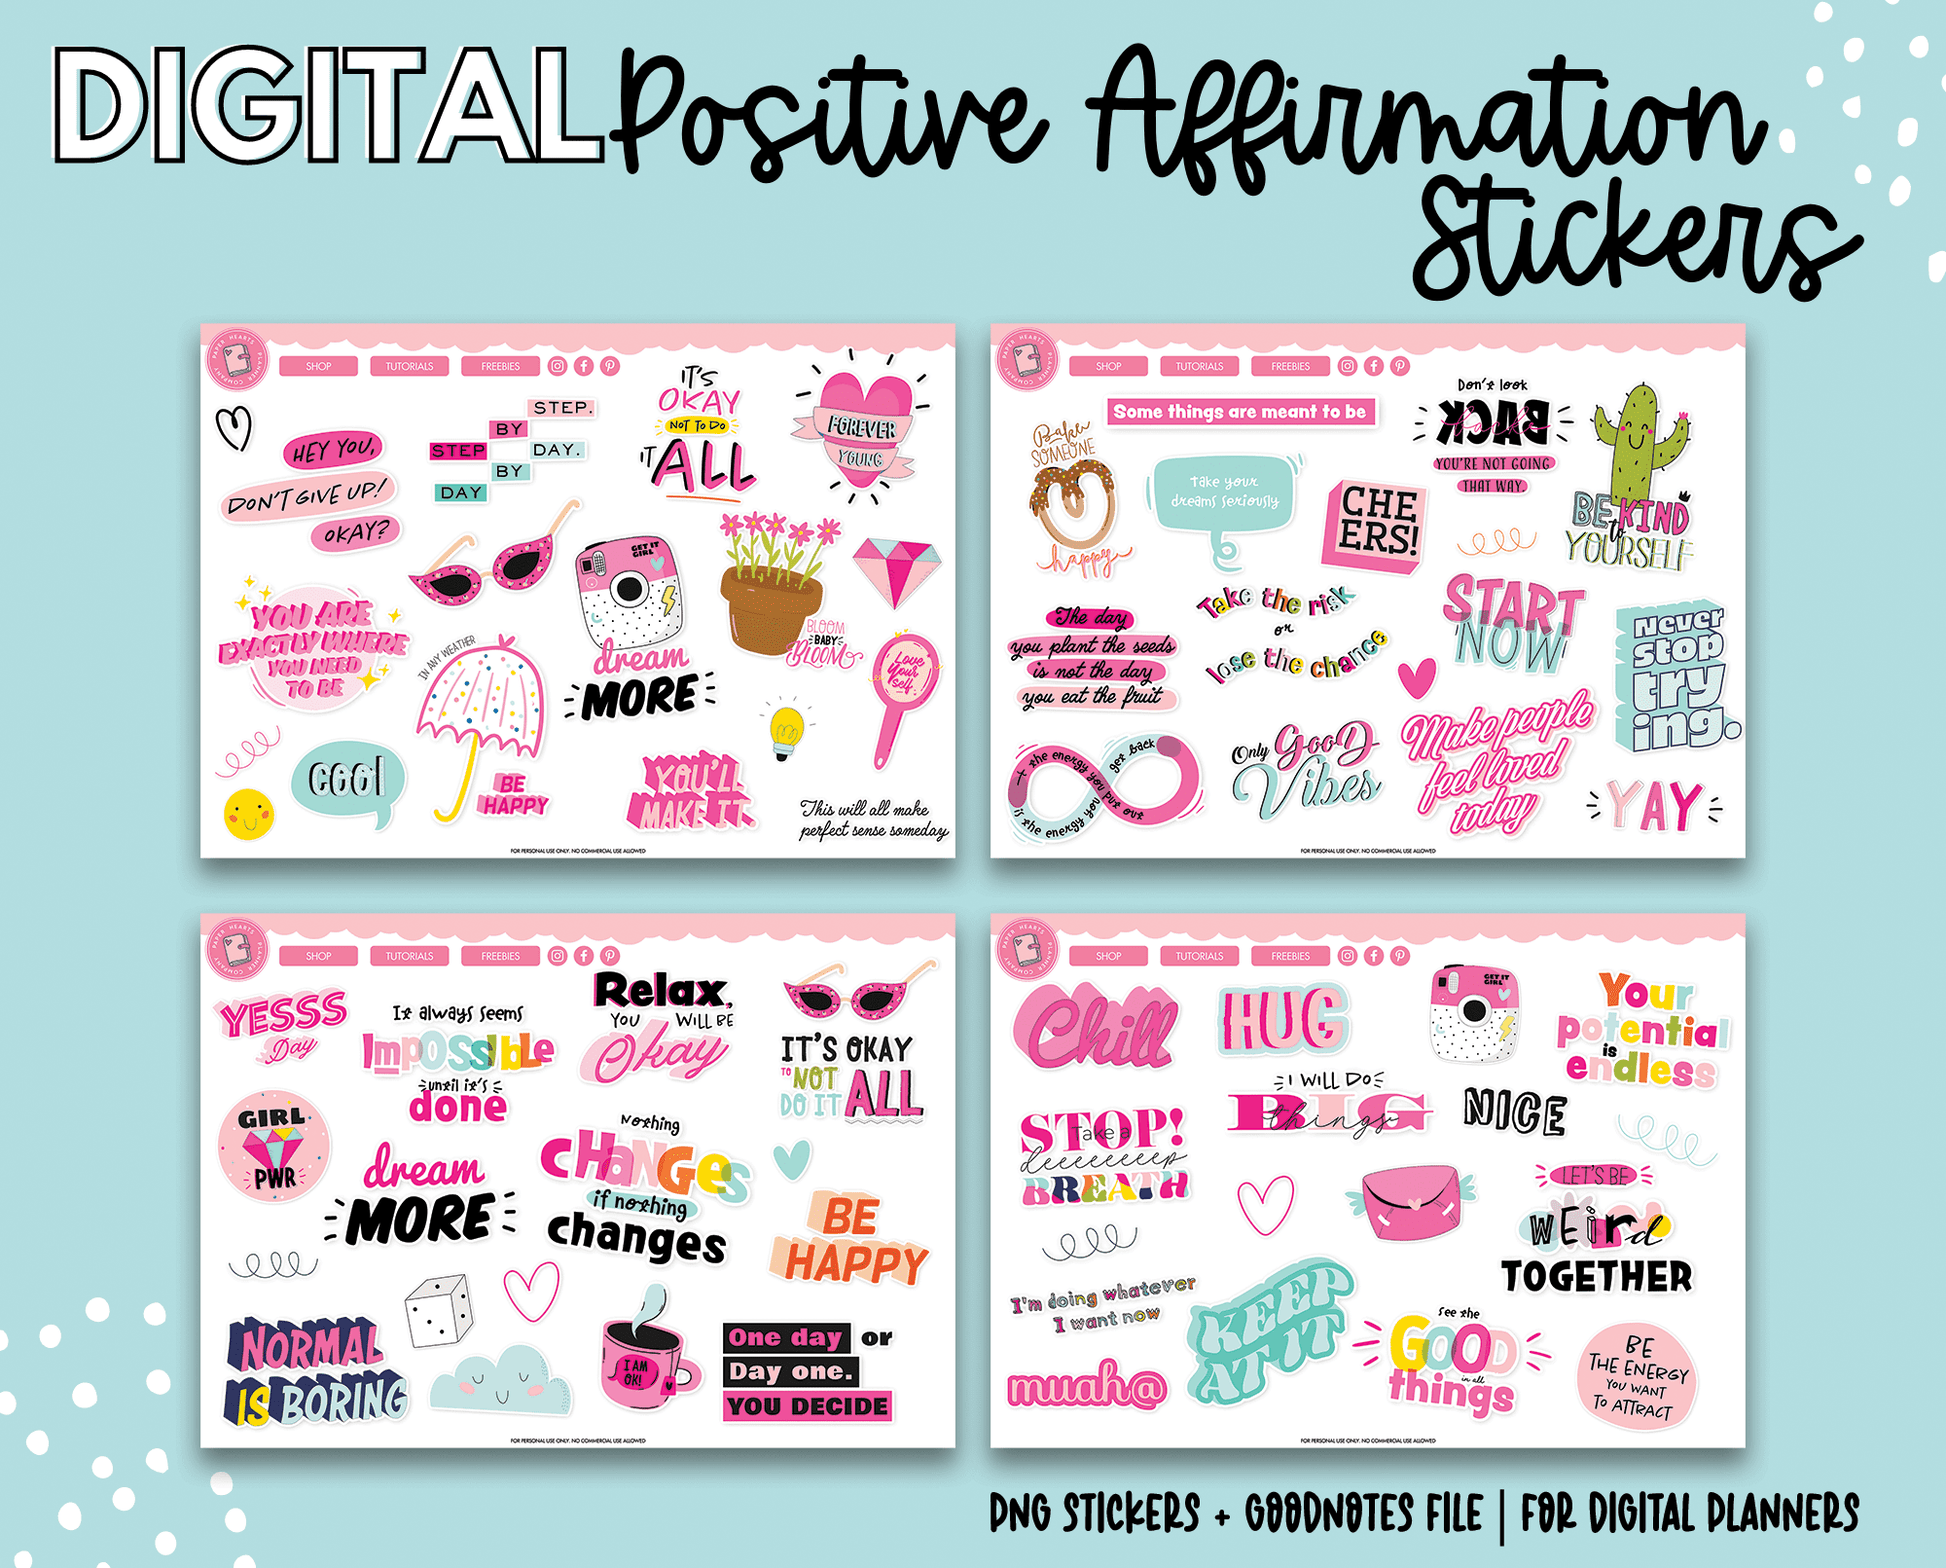 Positive Affirmations Digital Stickers